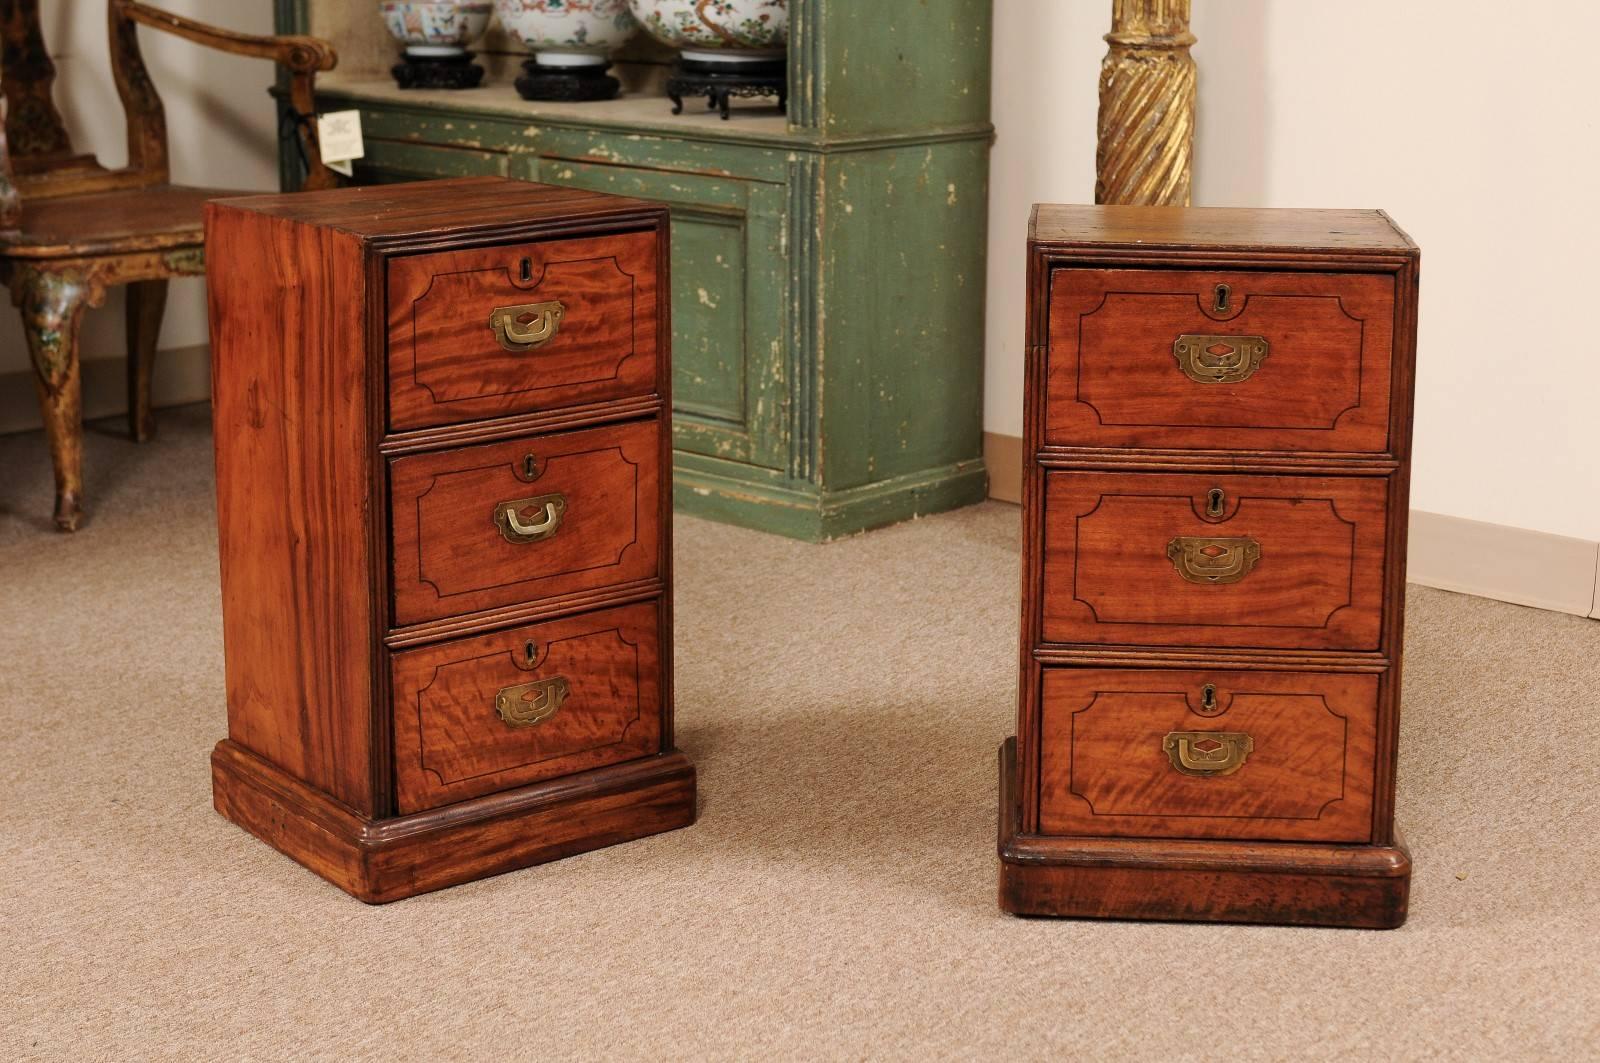 Pair of 19th century English mahogany bedside tables with three drawers in the Campaign style. Tables were the pedestals to a Partner's desk later converted into bedside tables.